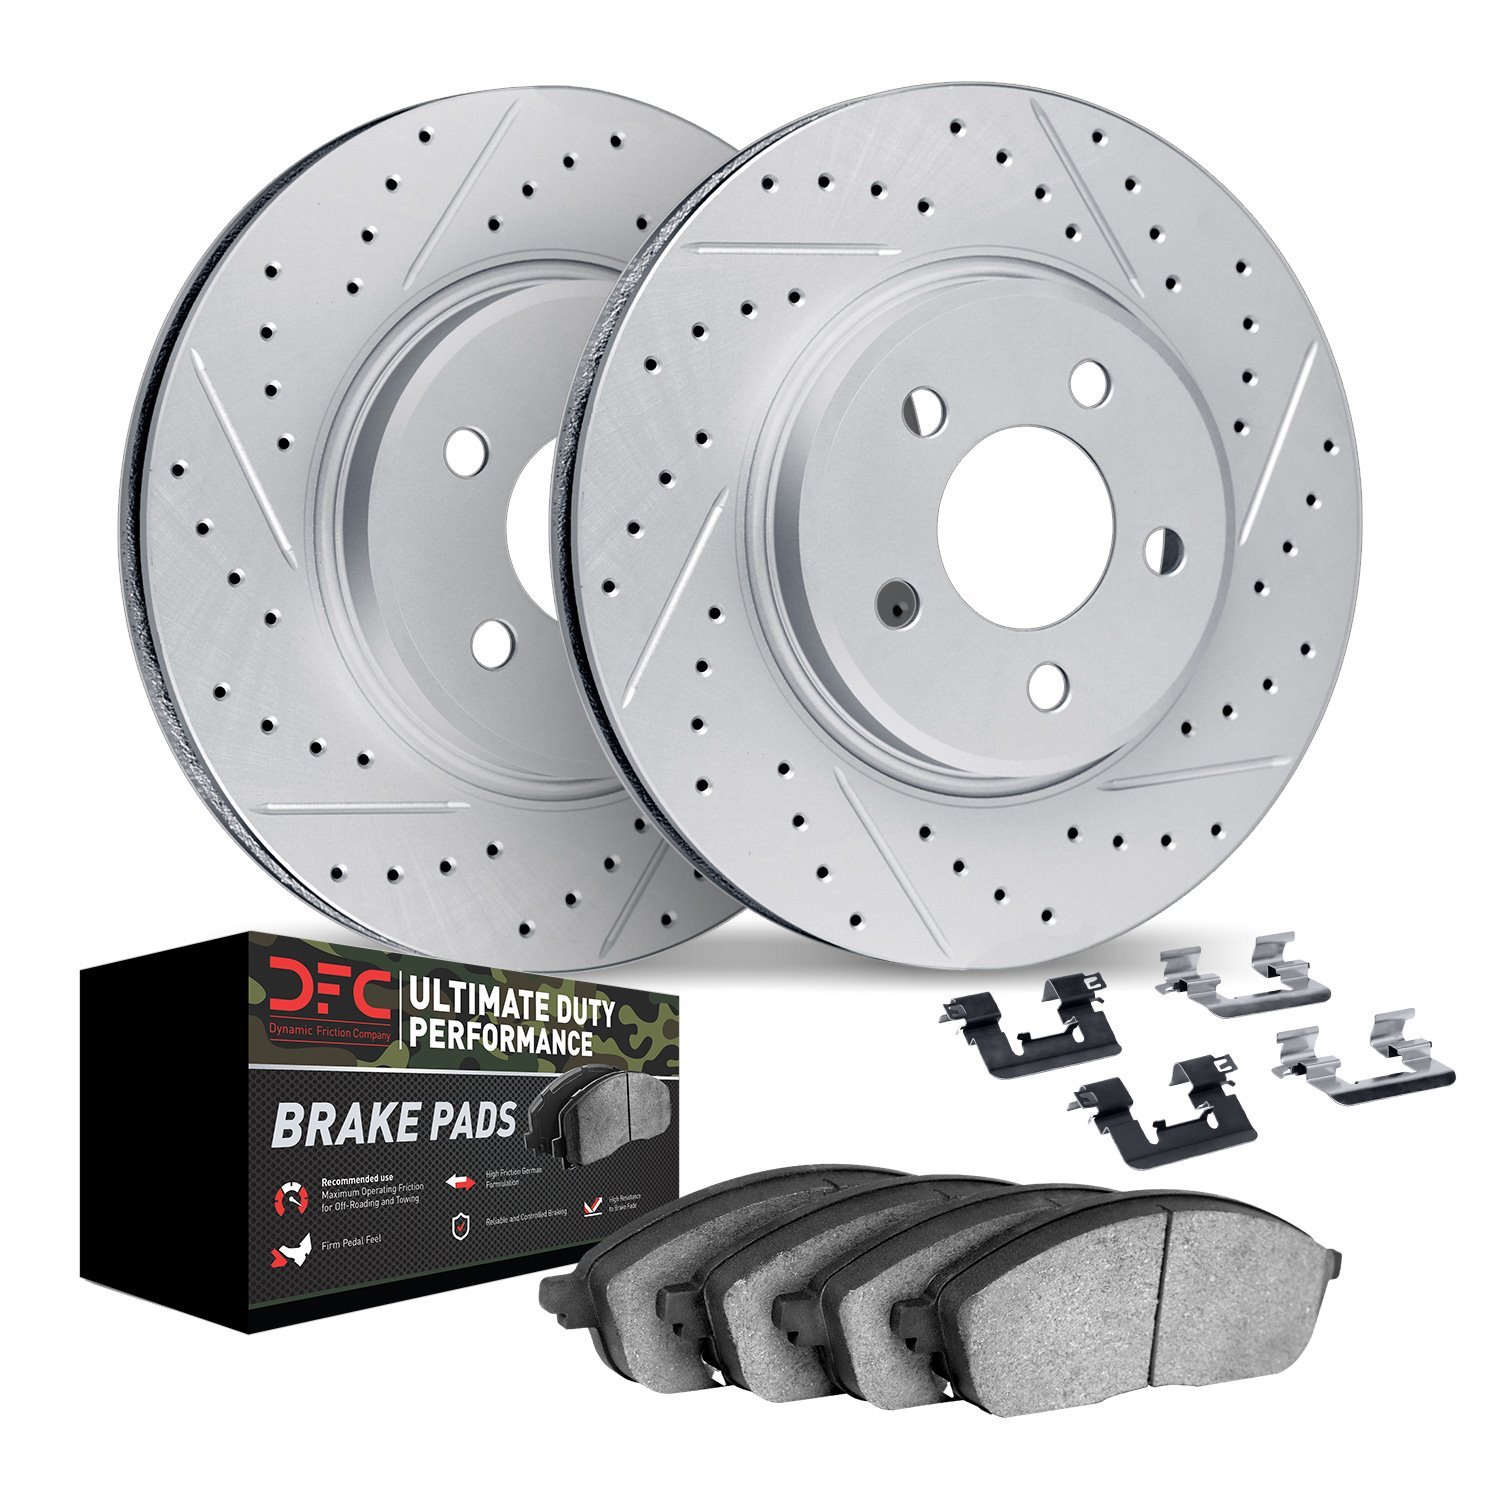 2412-48008 Geoperformance Drilled/Slotted Brake Rotors with Ultimate-Duty Brake Pads Kit & Hardware, 1998-2000 GM, Position: Fro